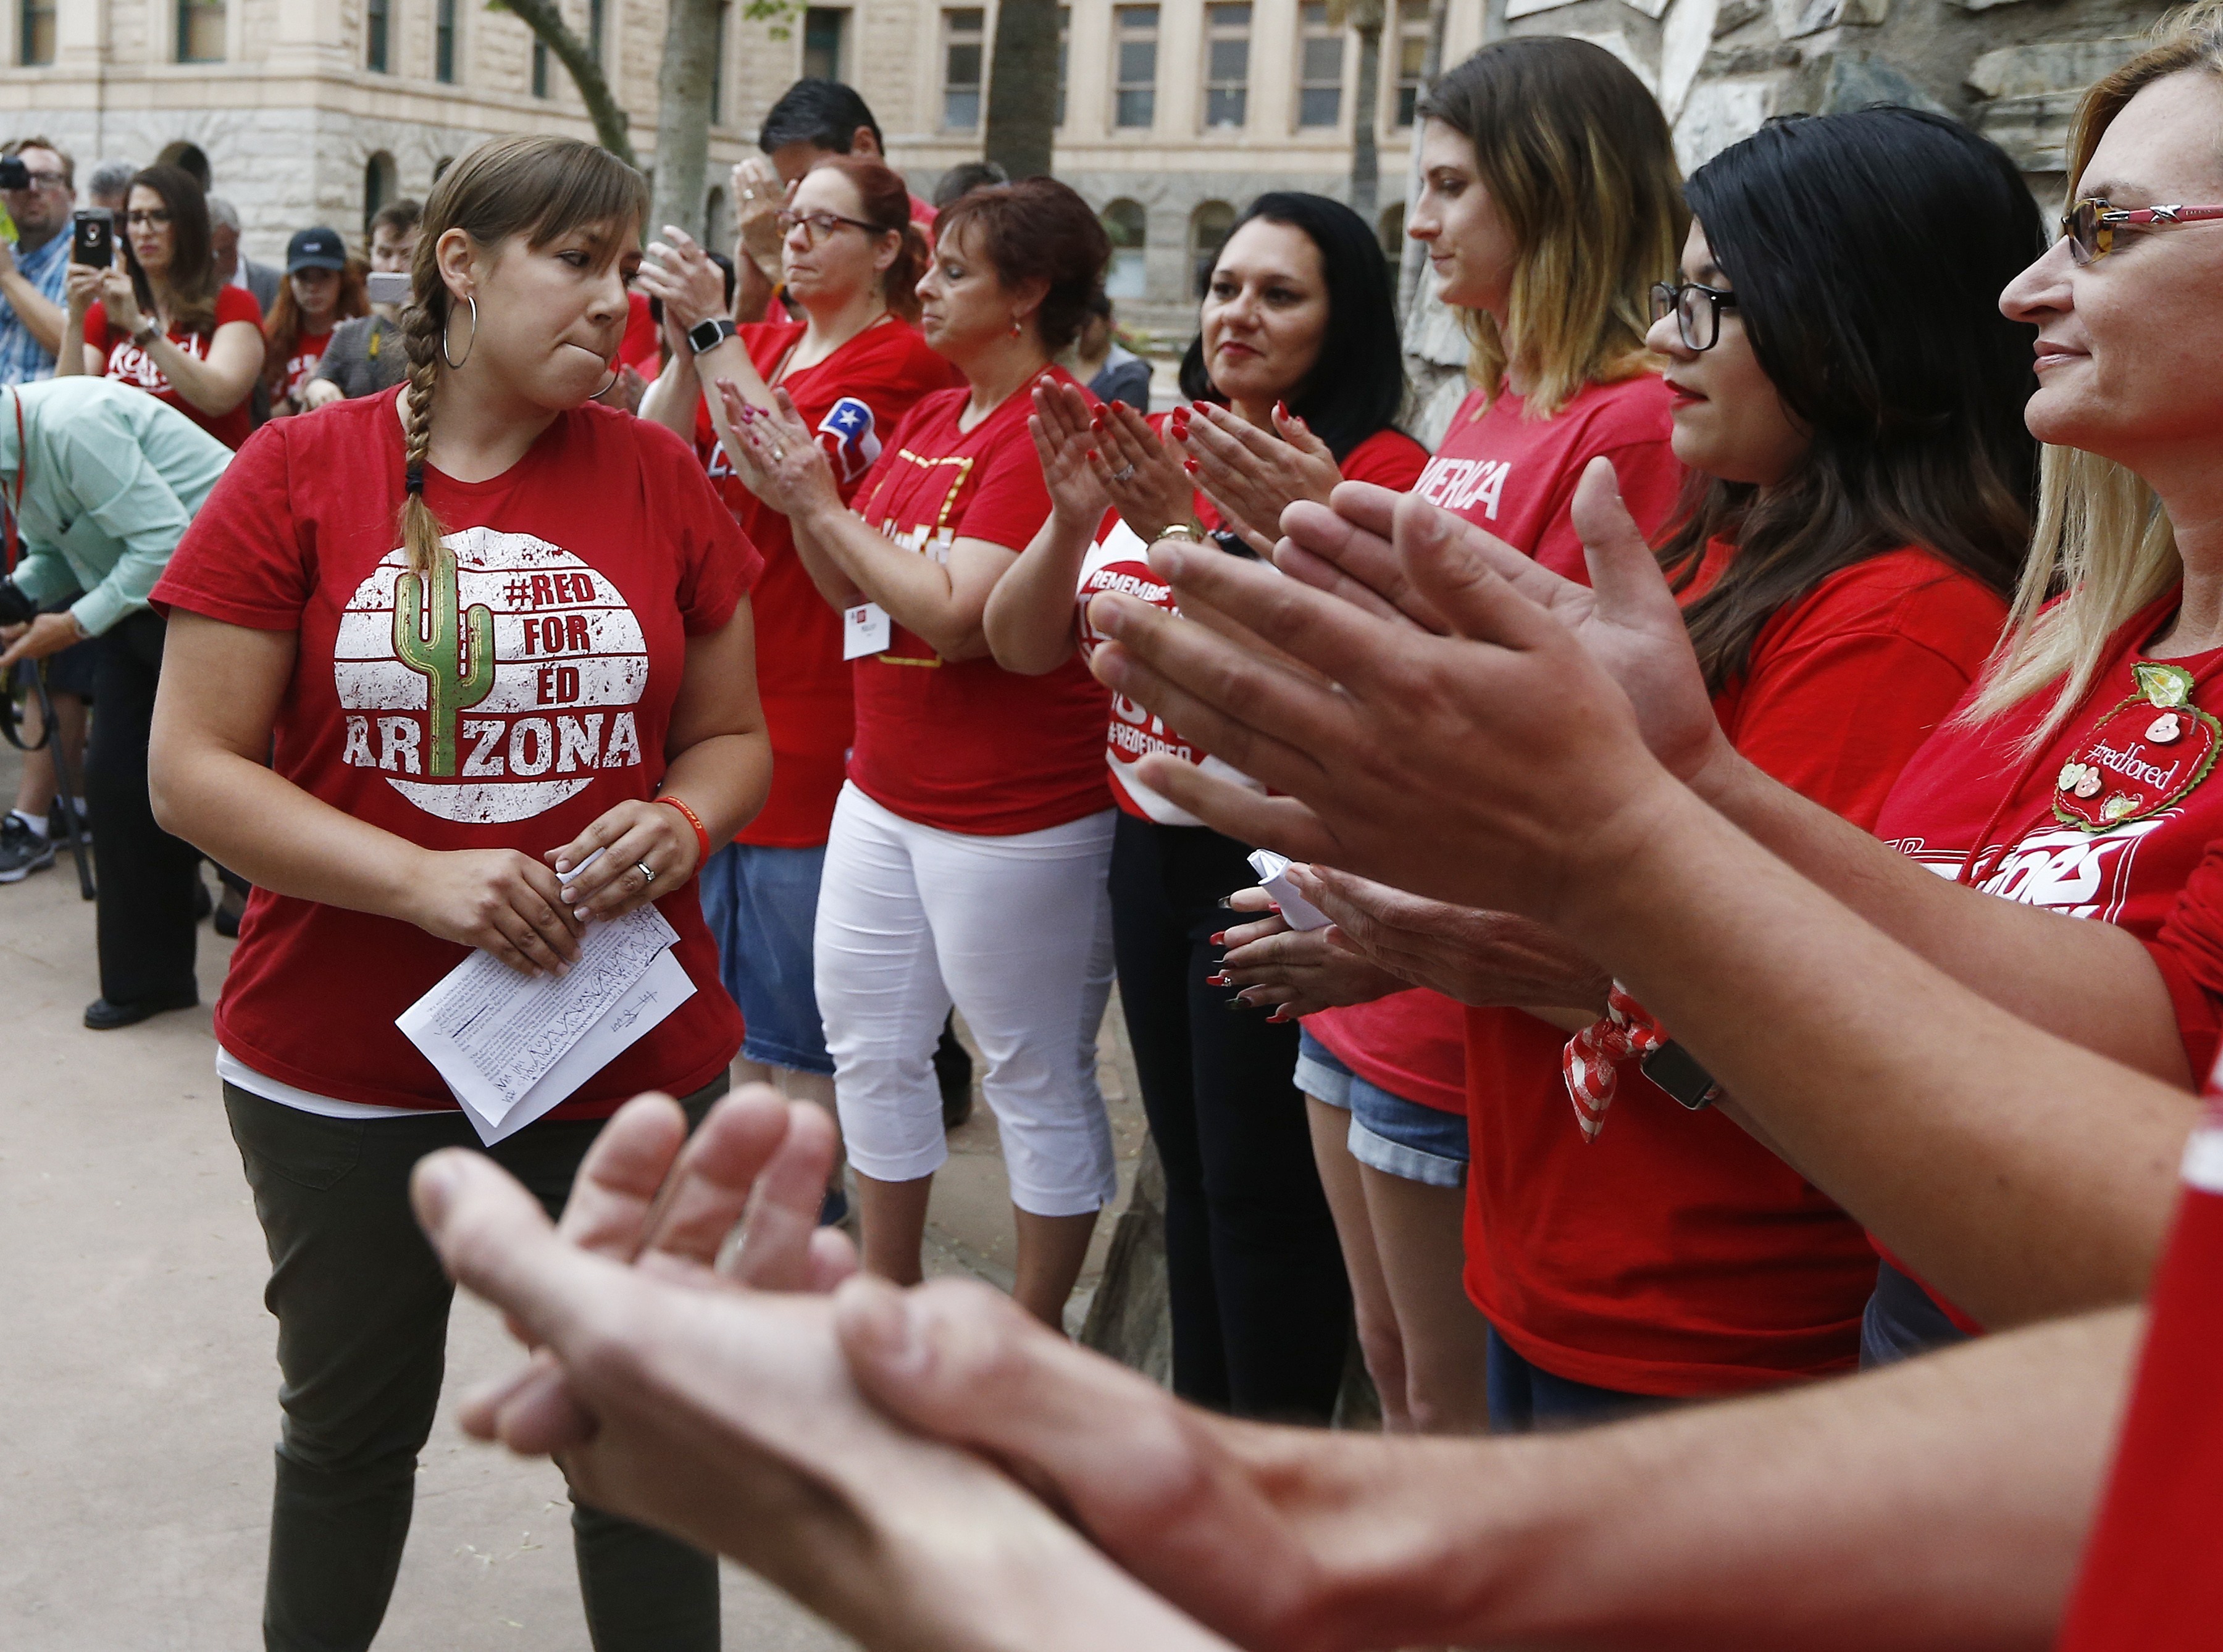 Phoenix teacher Rebecca Garelli, left, an Arizona Educators United member, is applauded after her announcement from protest organizers that teachers intend to go back to work as the statewide teachers strike enters a fourth day at the Arizona Capitol on May 1, 2018, in Phoenix.